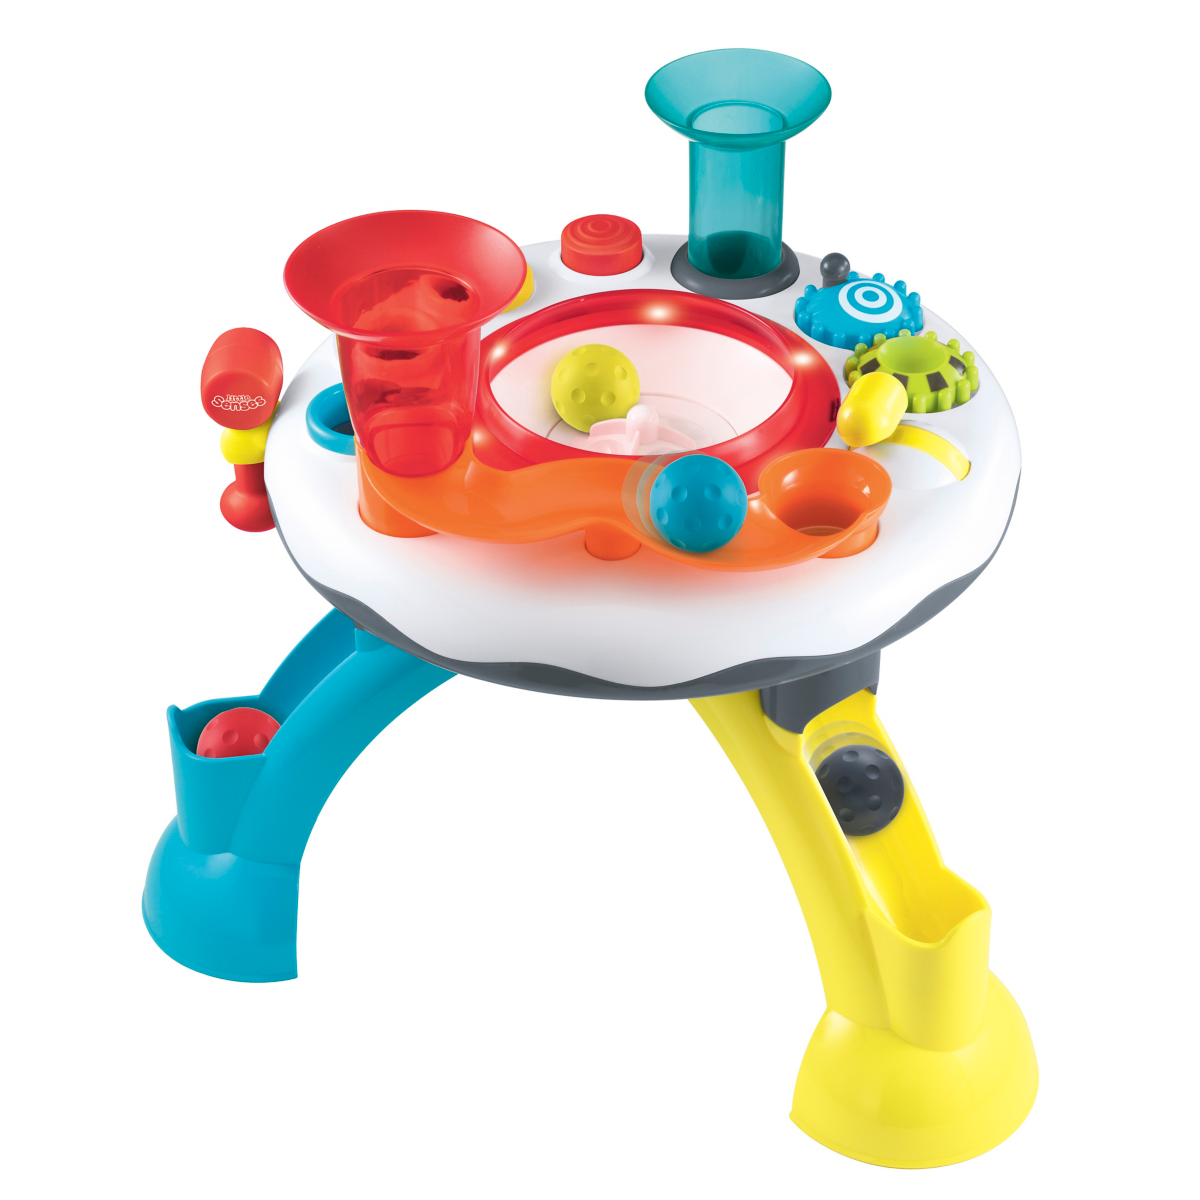 Little Senses Lights and Sounds Activity Table